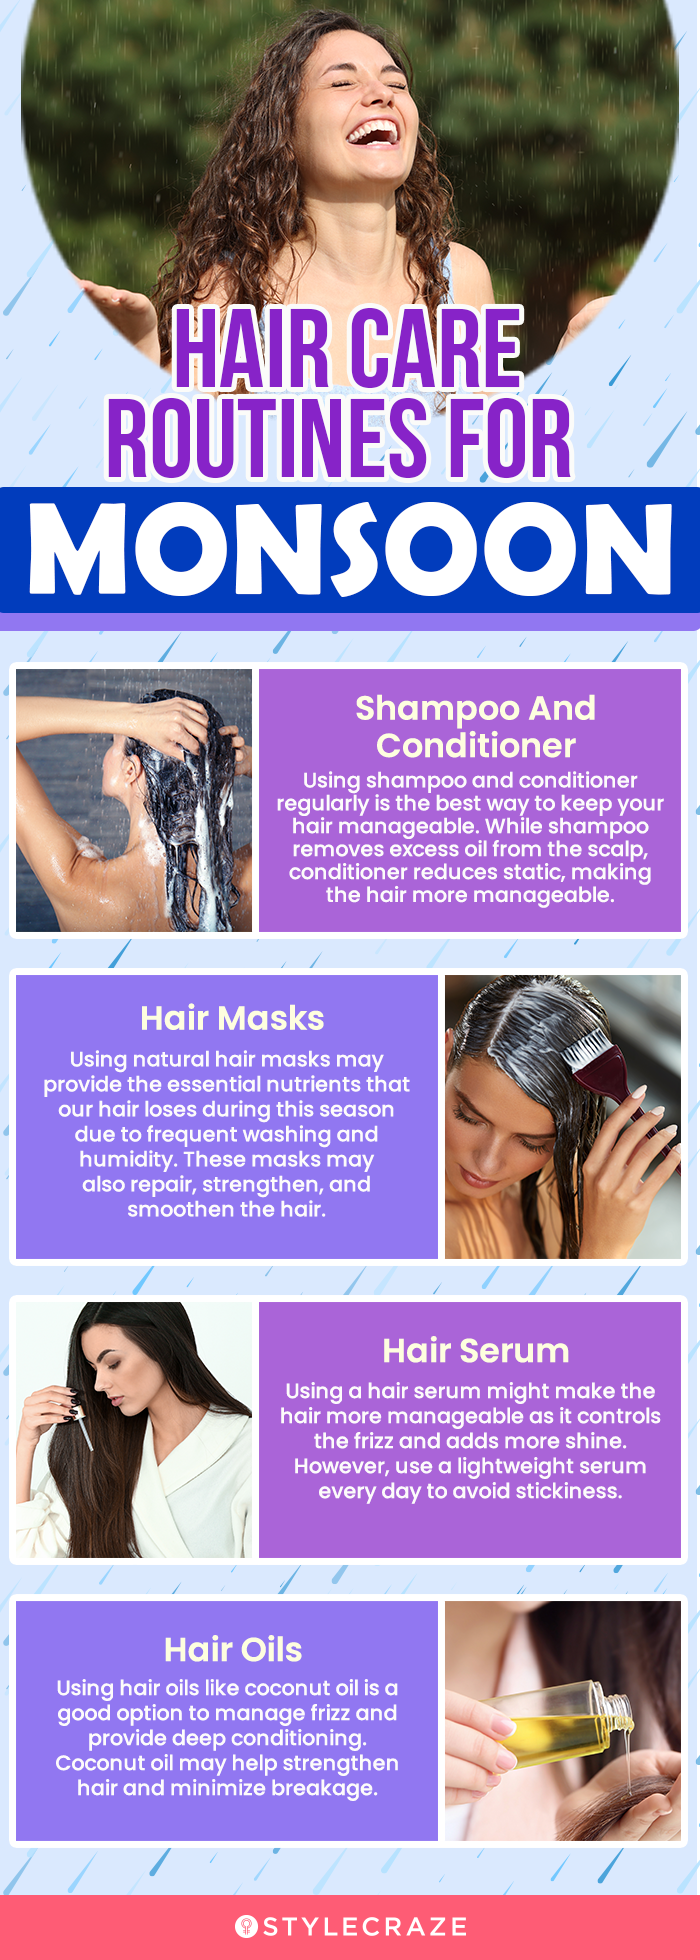 haircare routines for monsoon (infographic)